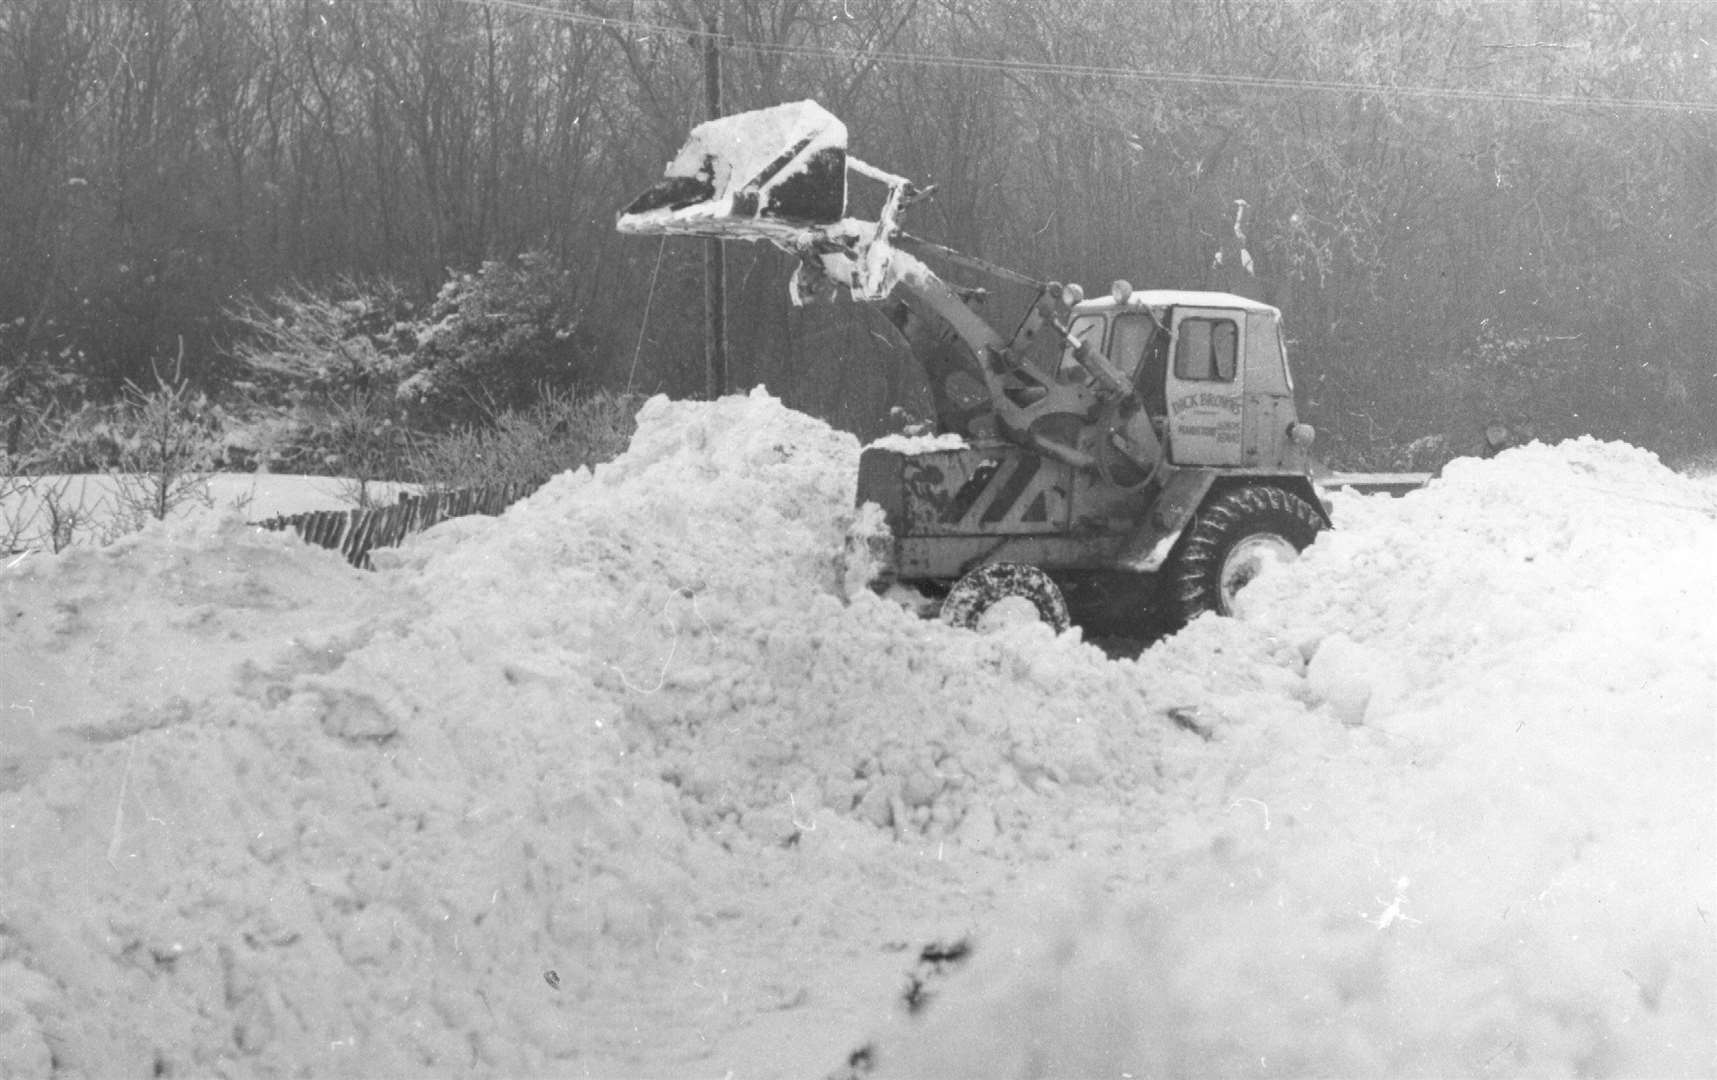 The snowfall started to fall on Boxing Day 1962 and continued through the first months of 1963